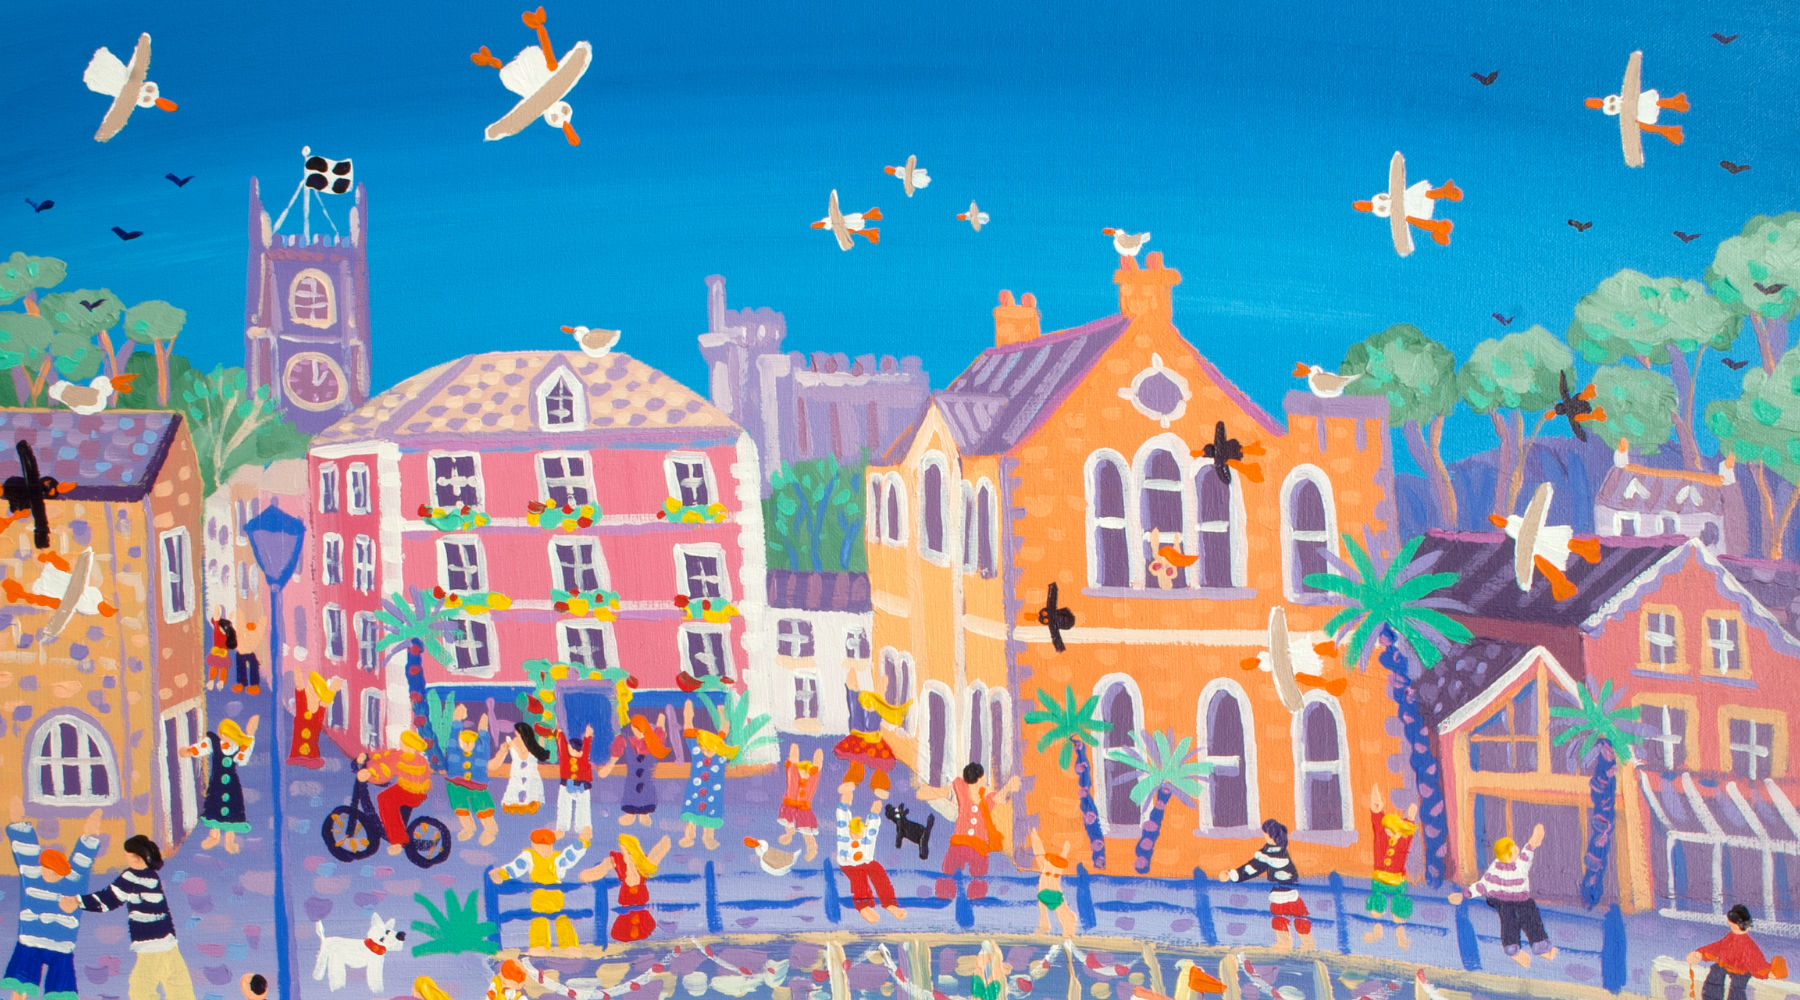 Fowey Art: Paintings, Posters, and Prints from the Lovely Town of Fowey